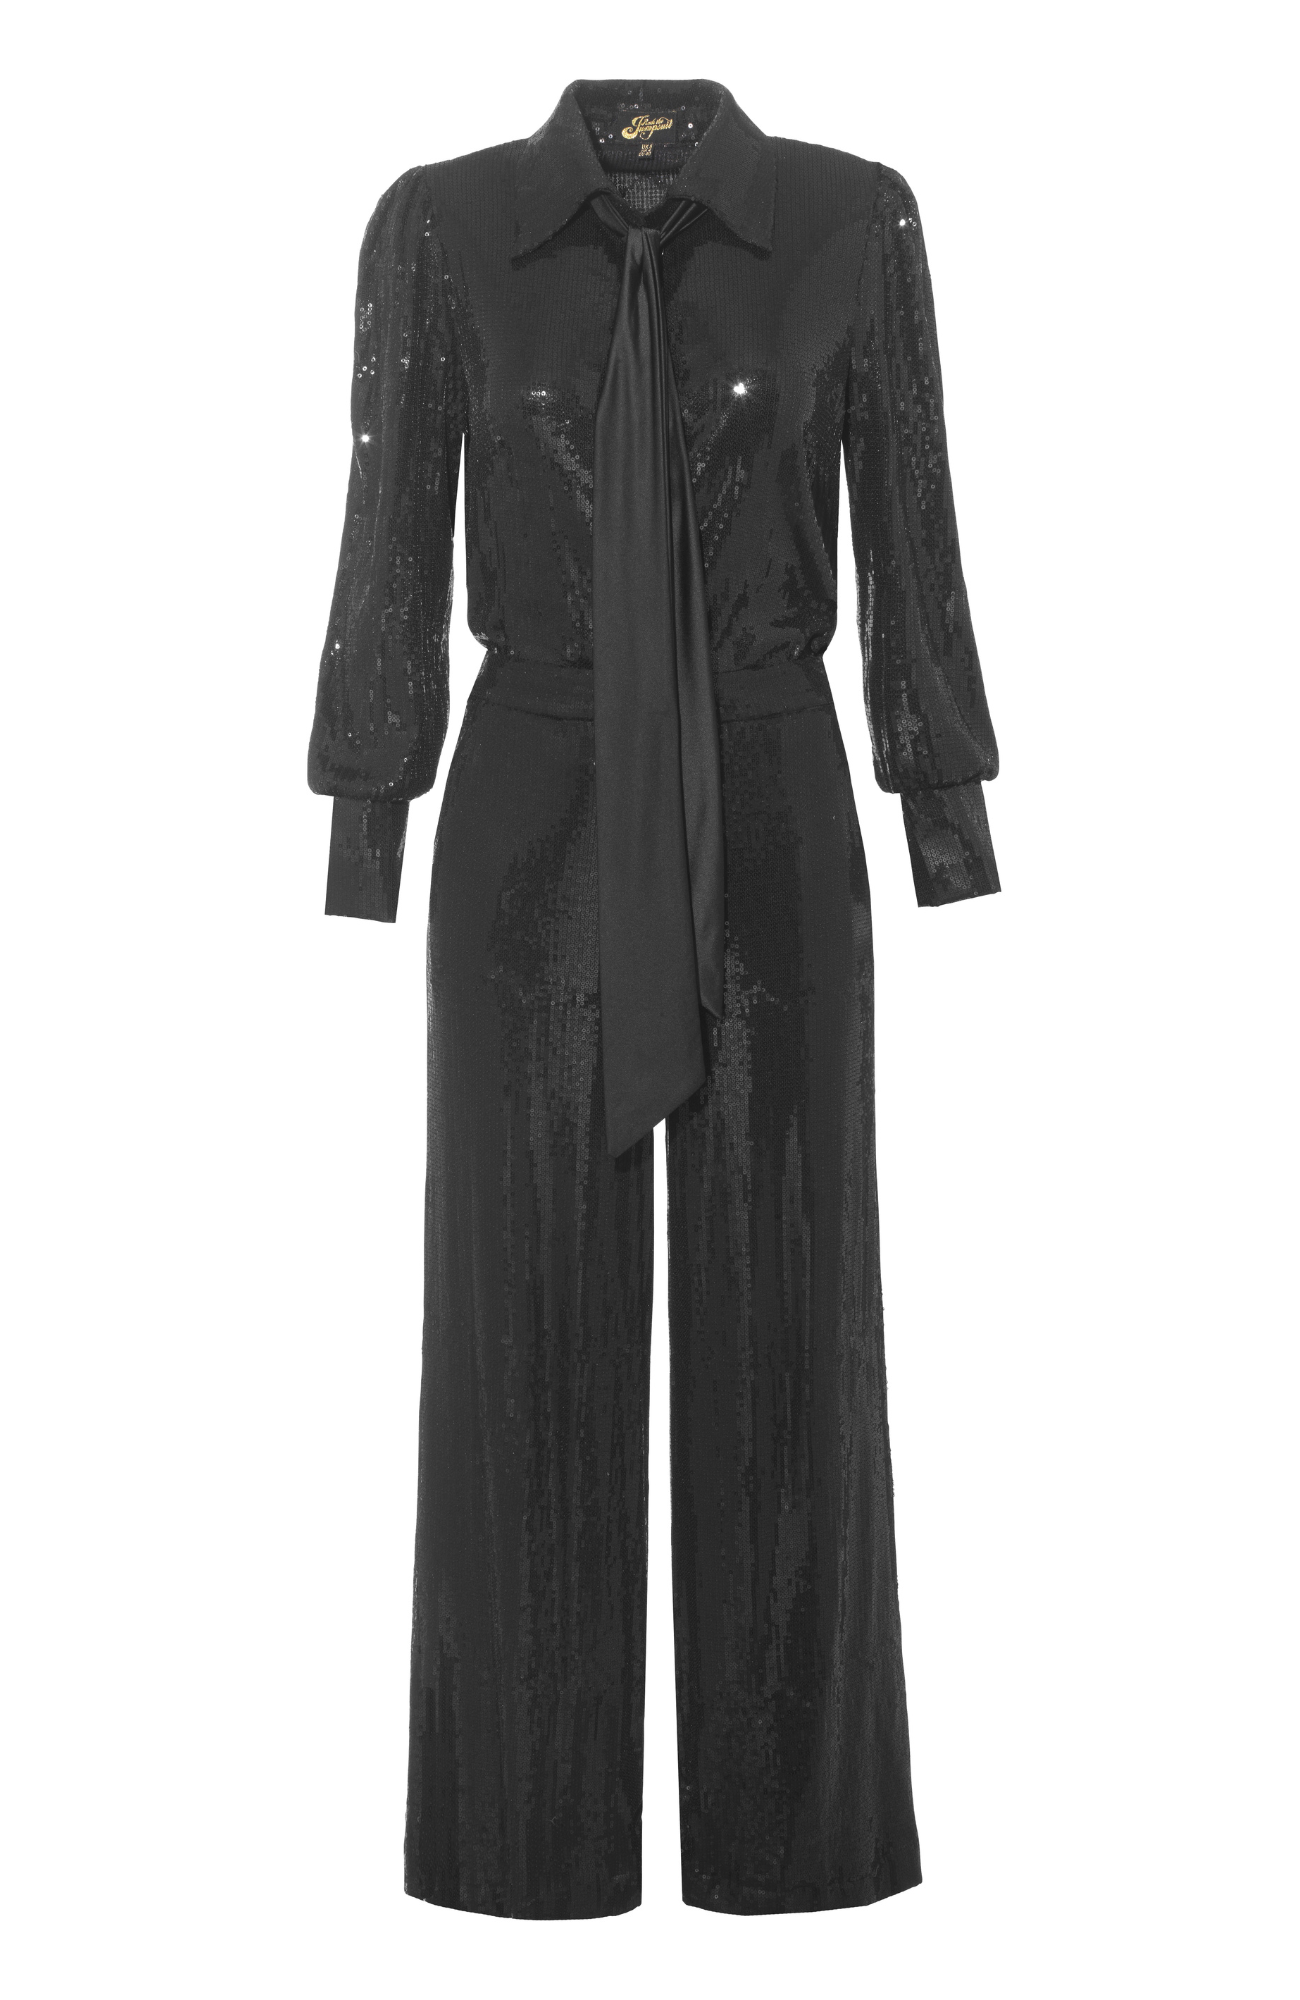 The Rockin Sequin Trousers - Rock the Jumpsuit